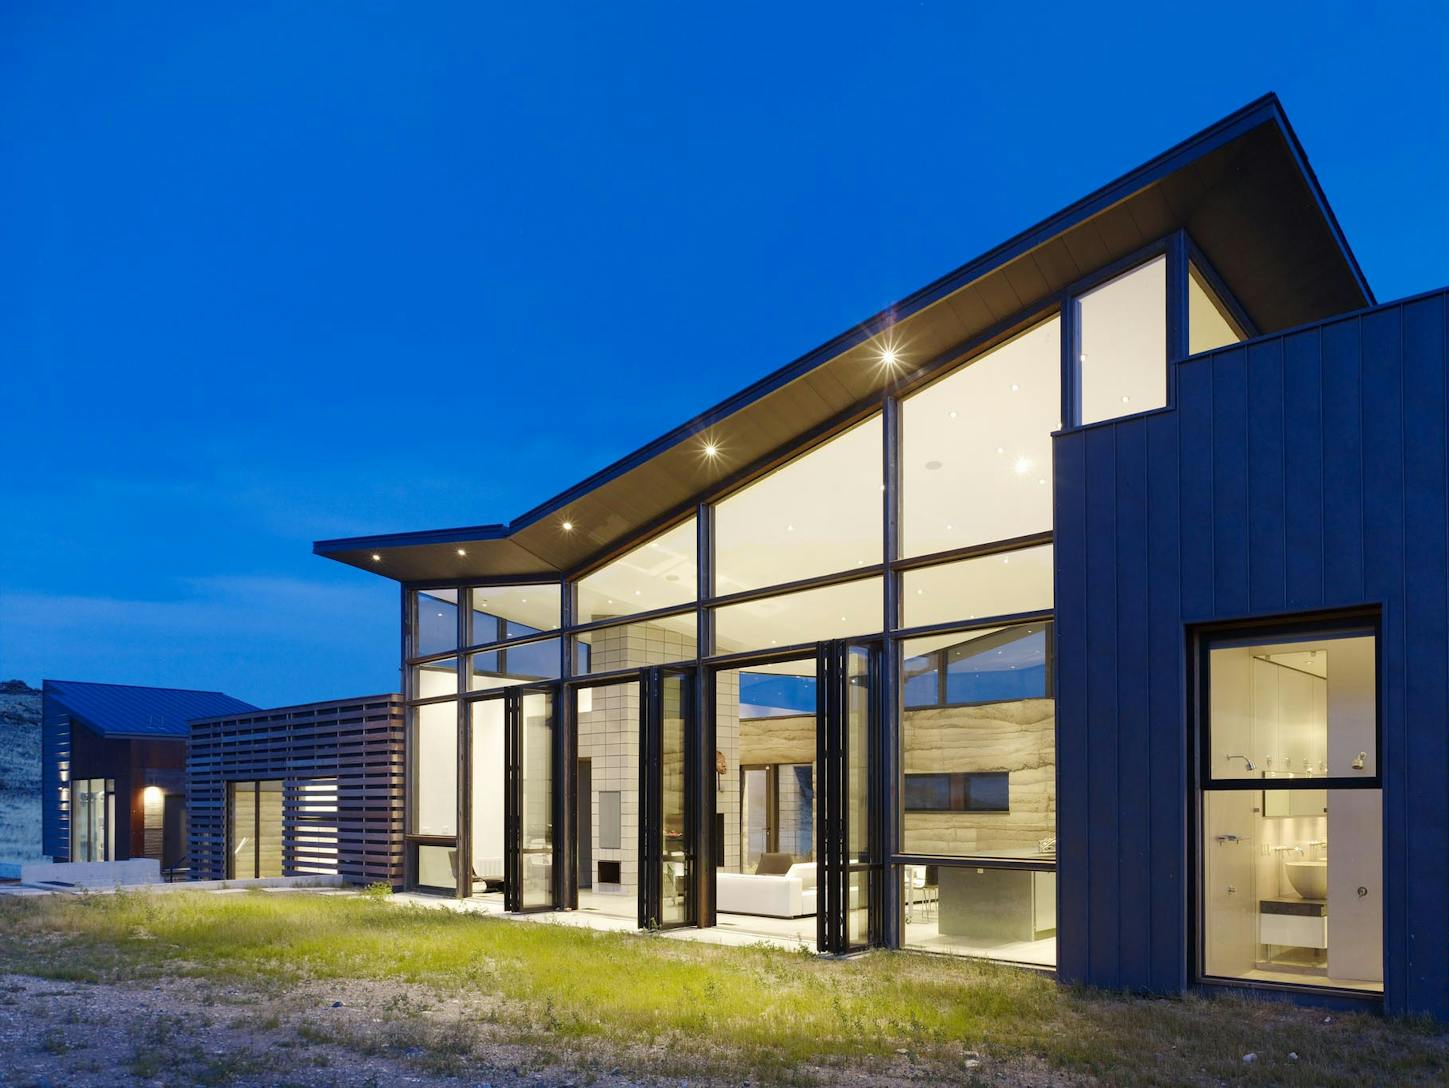 SL70 large house in a mountain valley with a sustainable architectural design at Wapiti Valley